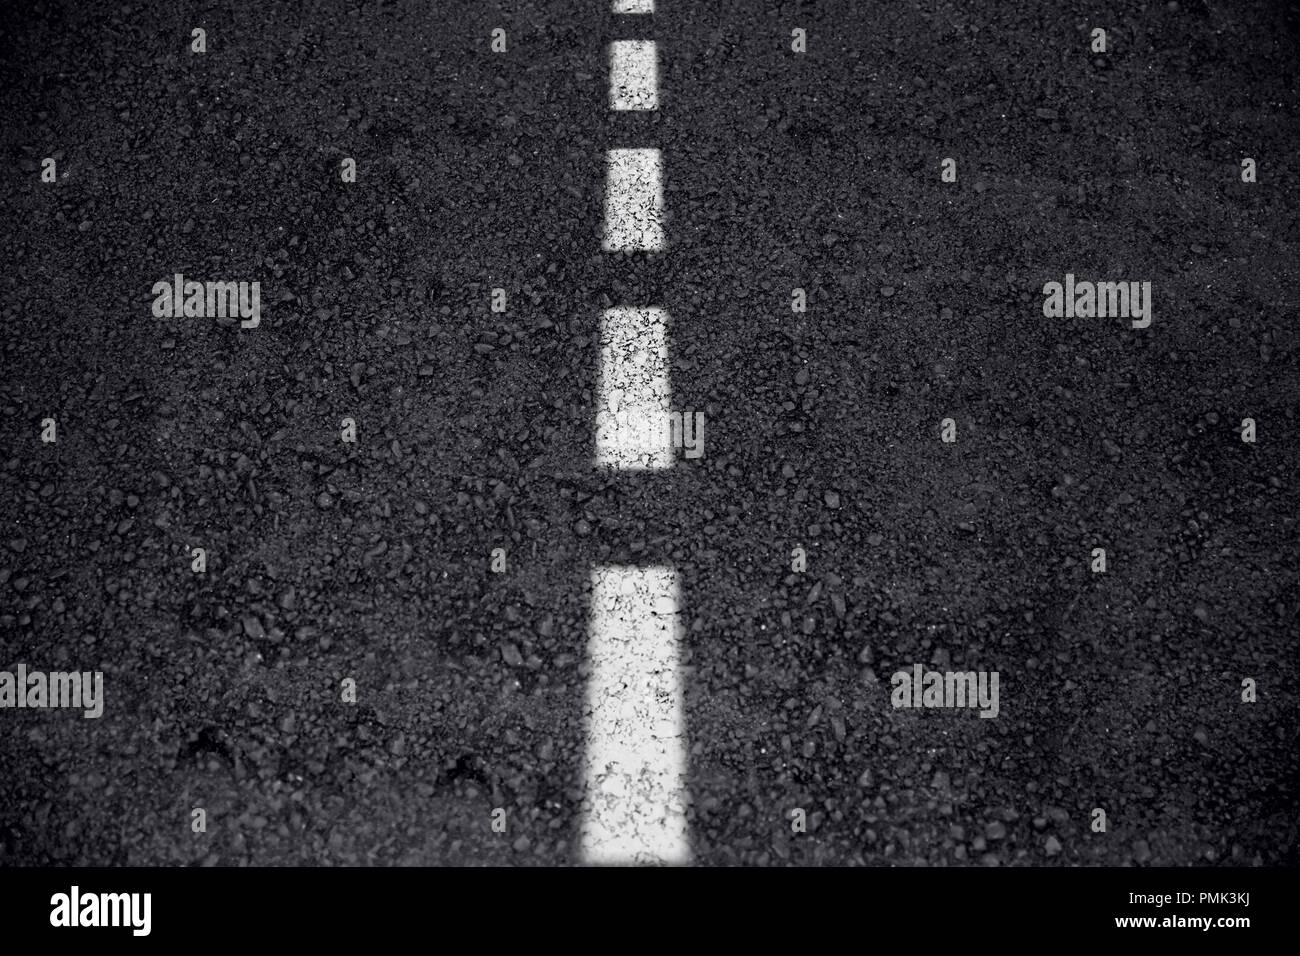 asphalt road center white line two ways on freeway or highway texture background Stock Photo